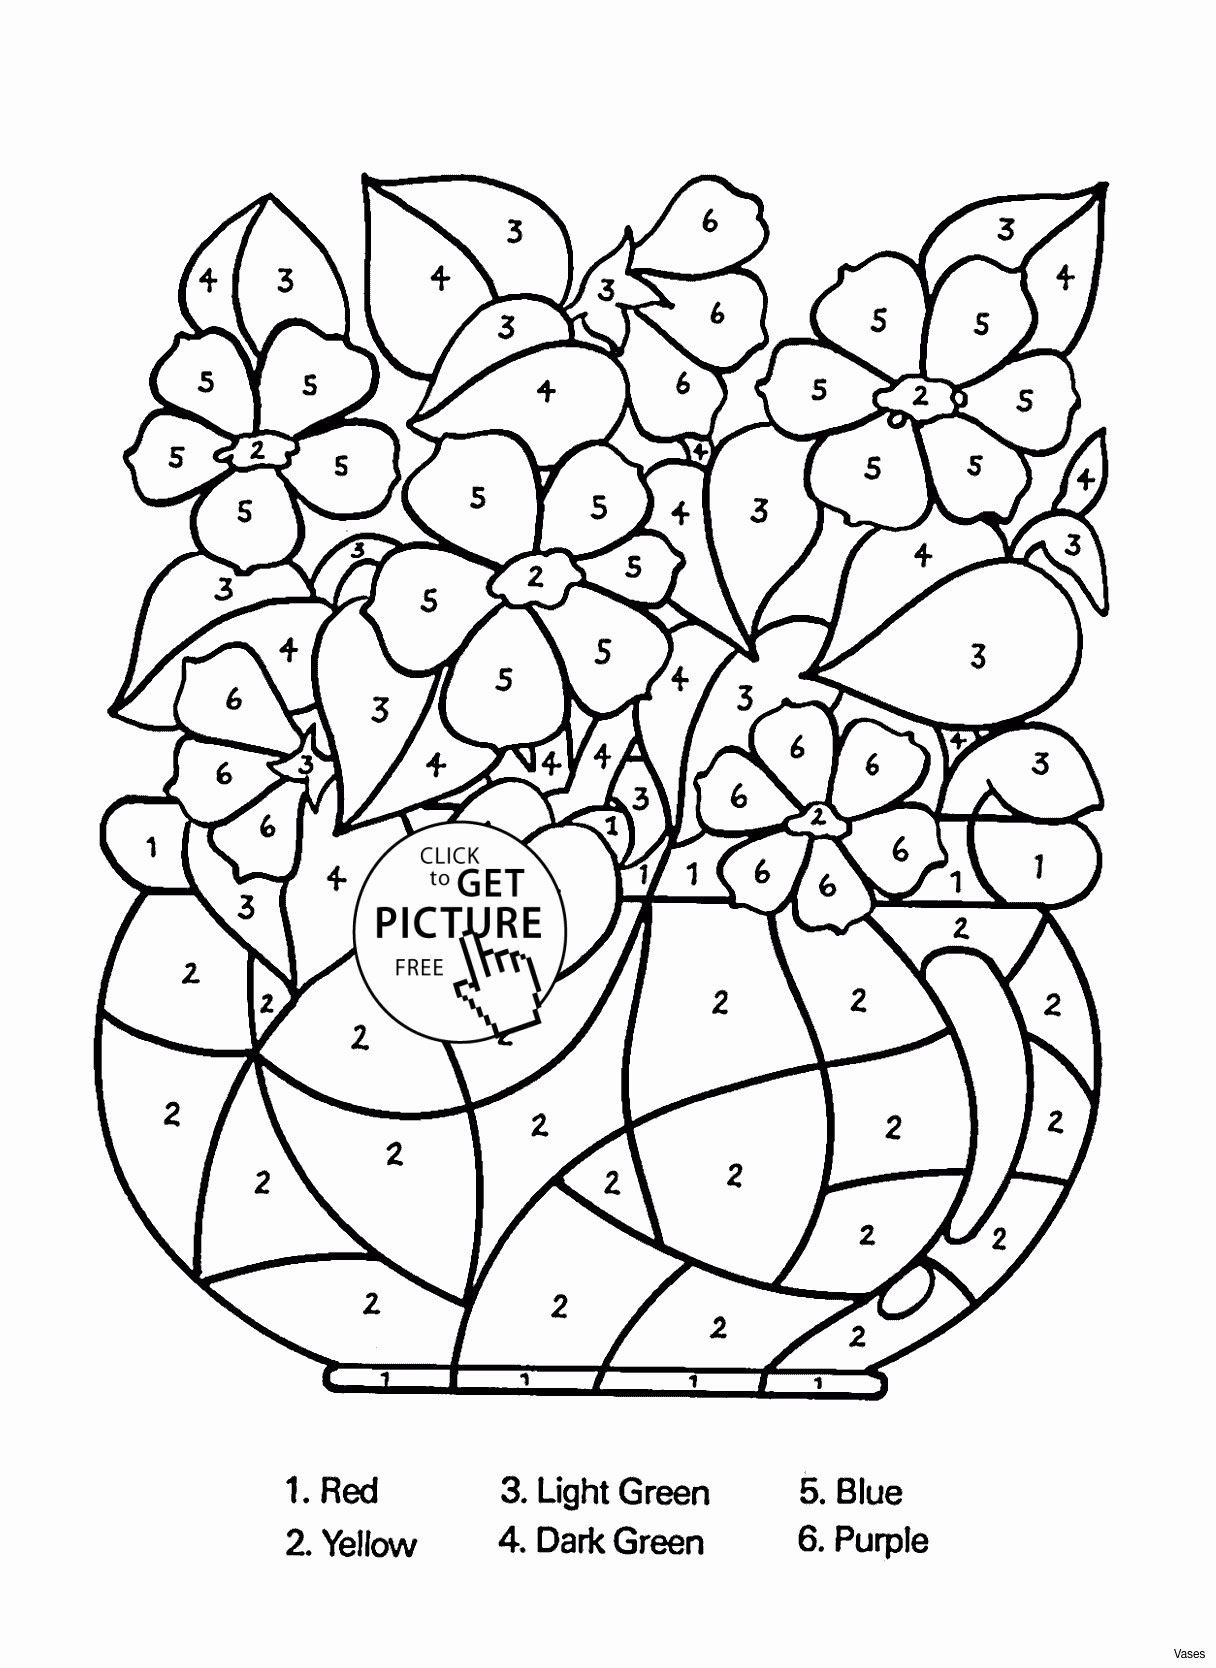 11 Unique Pictures Of Yellow Roses In A Vase 2024 free download pictures of yellow roses in a vase of iphone wallpaper yellow flowers inspirational vases flower vase within iphone wallpaper yellow flowers inspirational vases flower vase coloring page pag